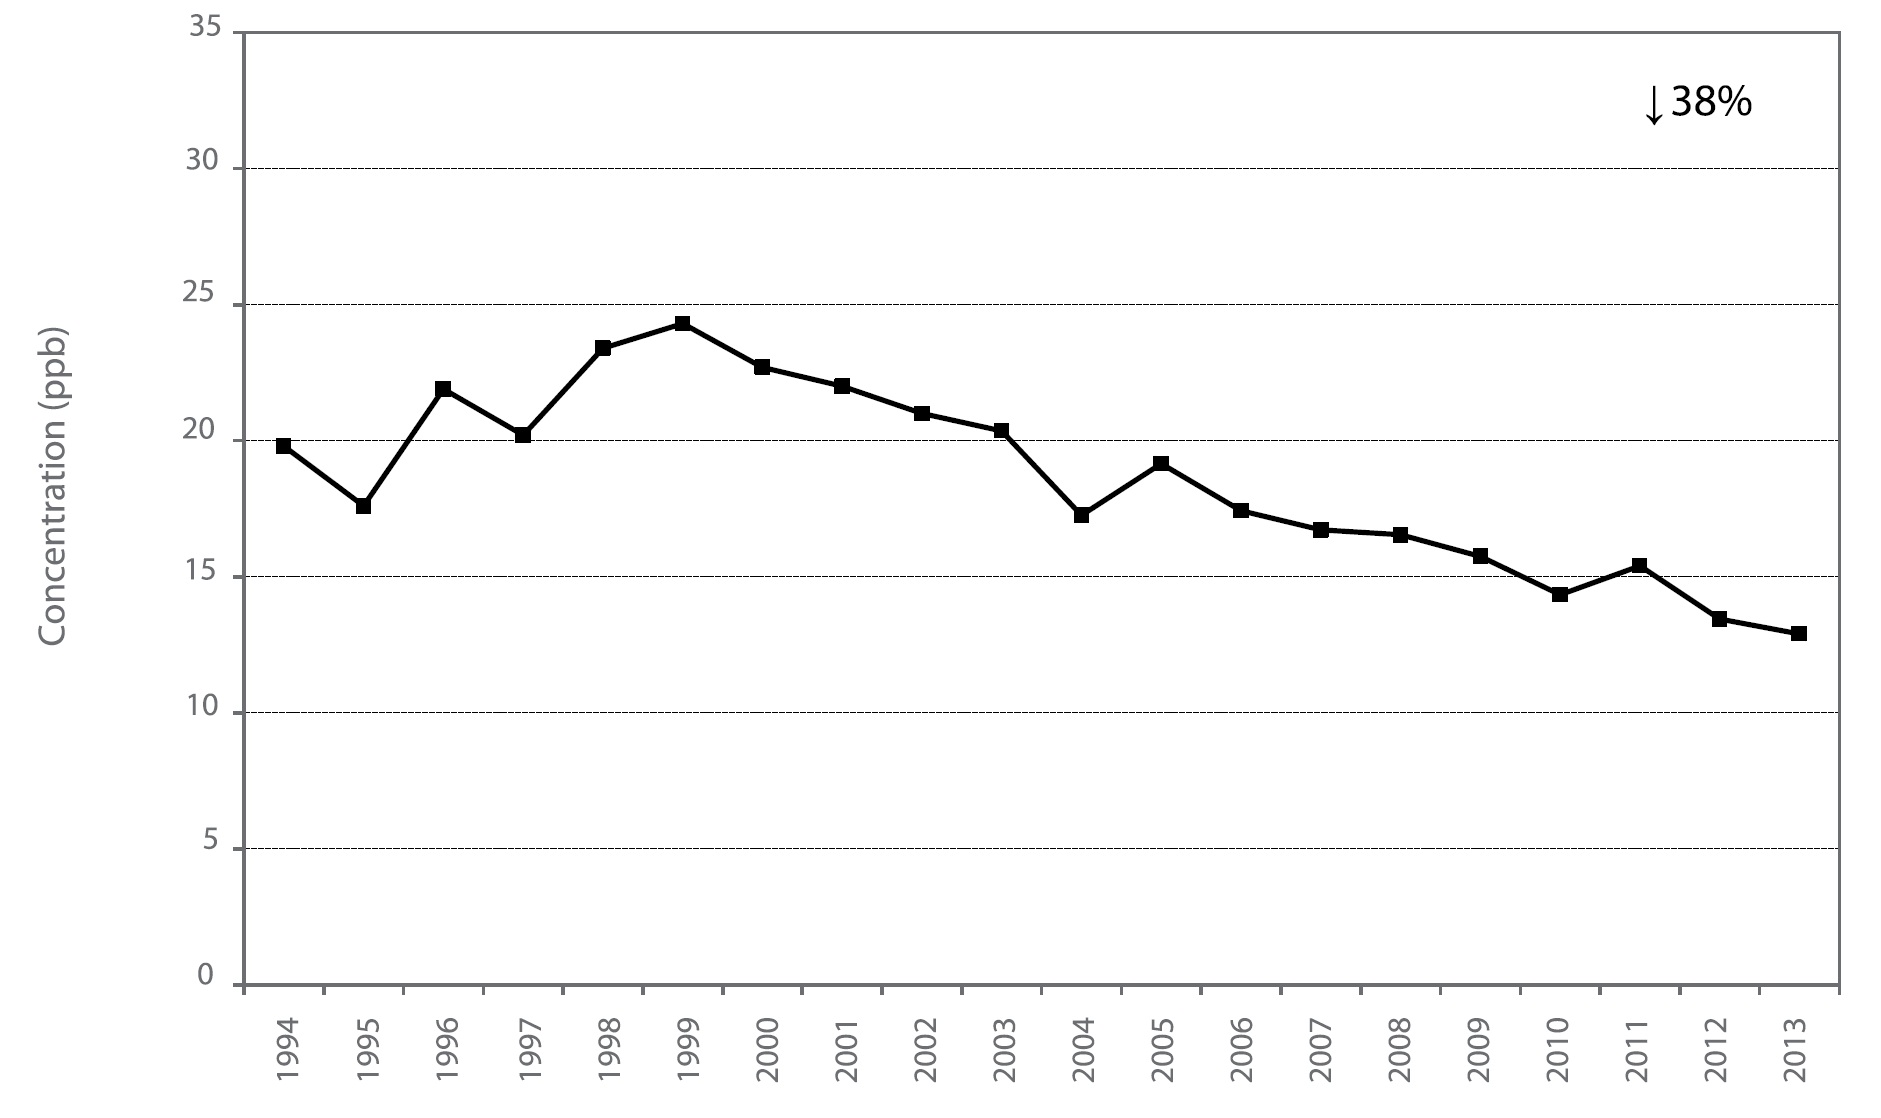 Figure A36 is a line chart displaying the nitrogen dioxide annual mean at Toronto North from 1994 to 2013. Over this 20-year period, nitrogen dioxide decreased 38%.